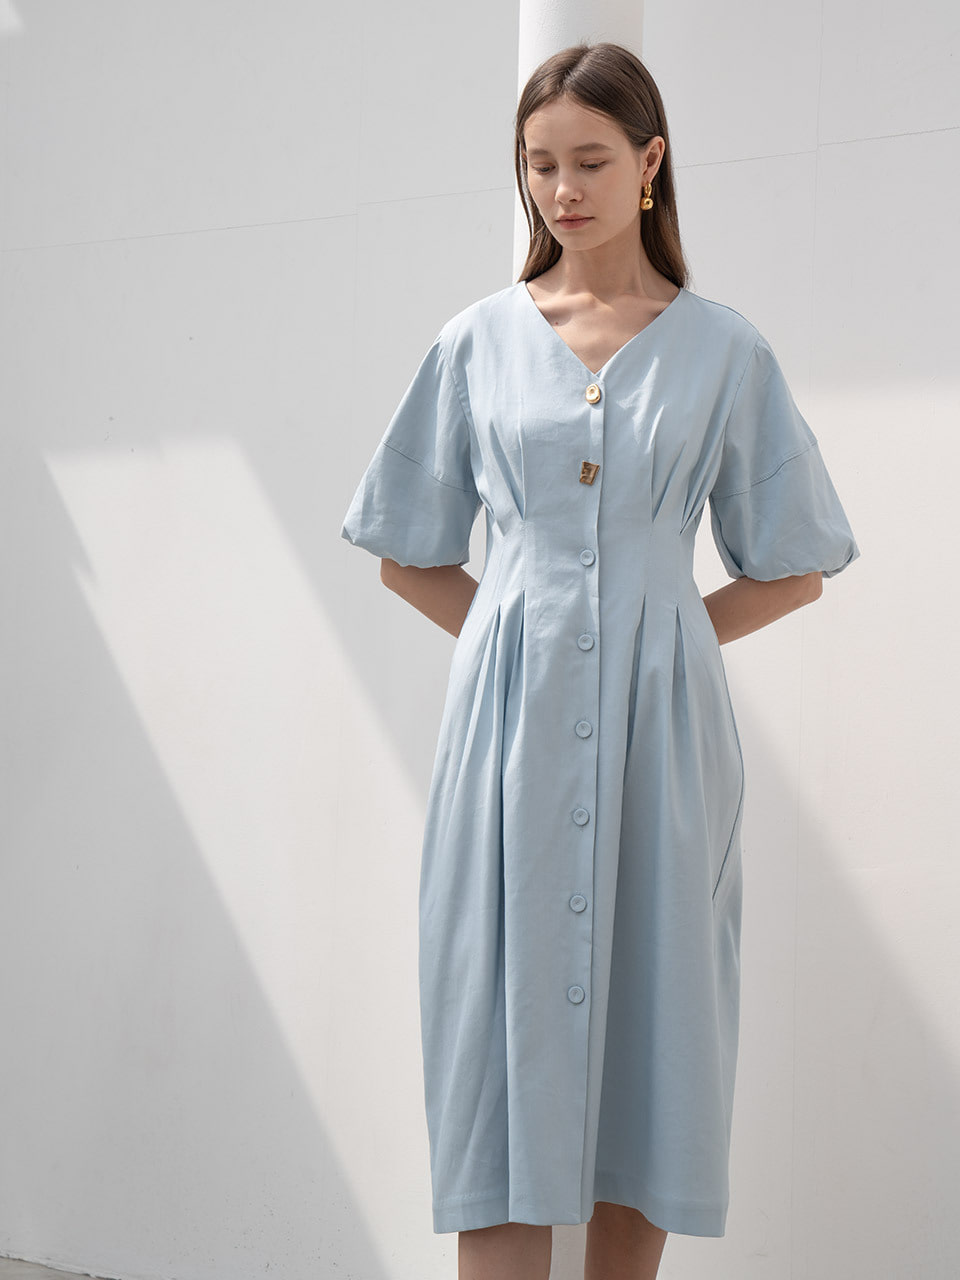 [LAST 1장]Gold button pointed dress in sky blue